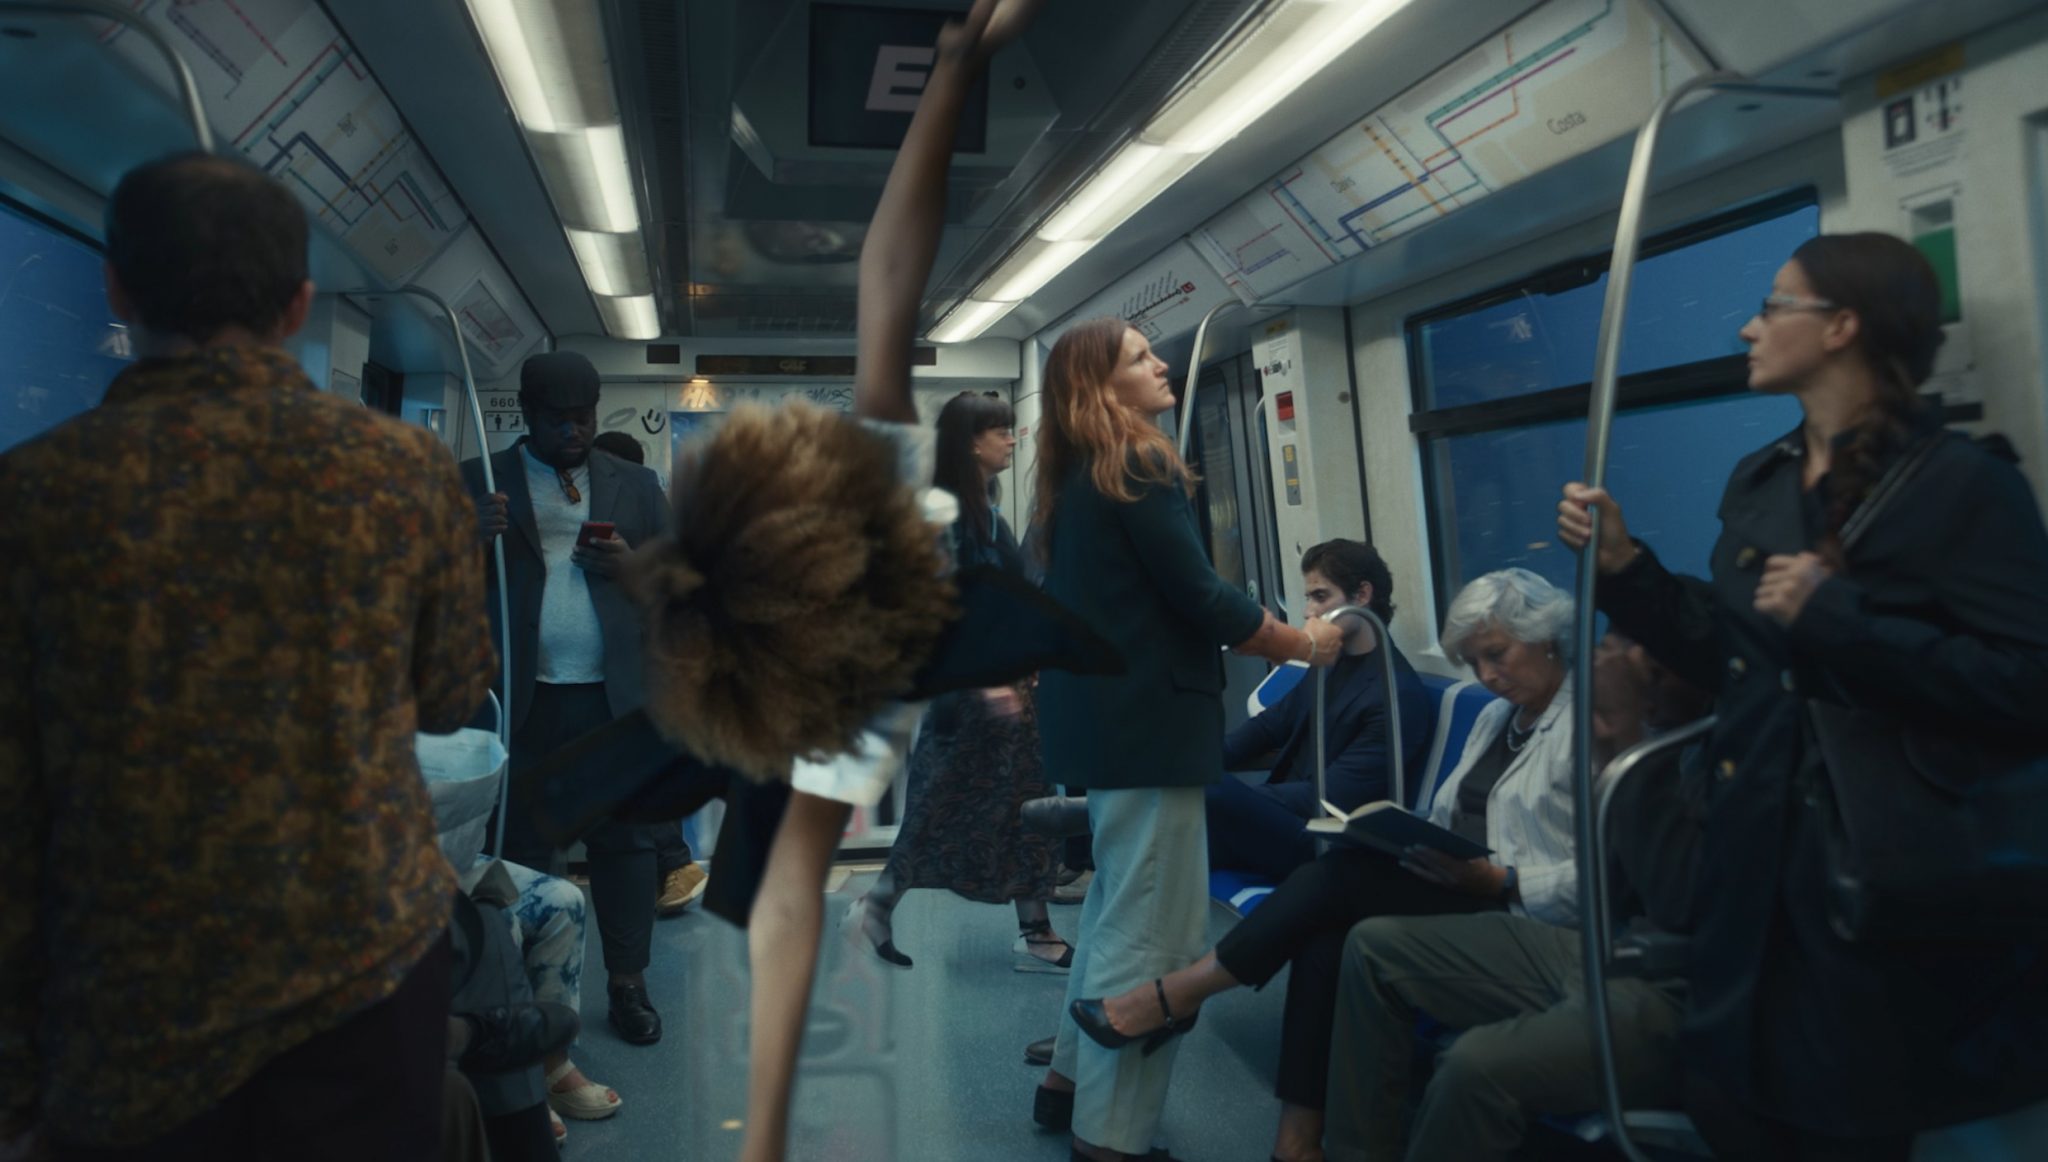 People on a train carriage with a person in the middle in the air